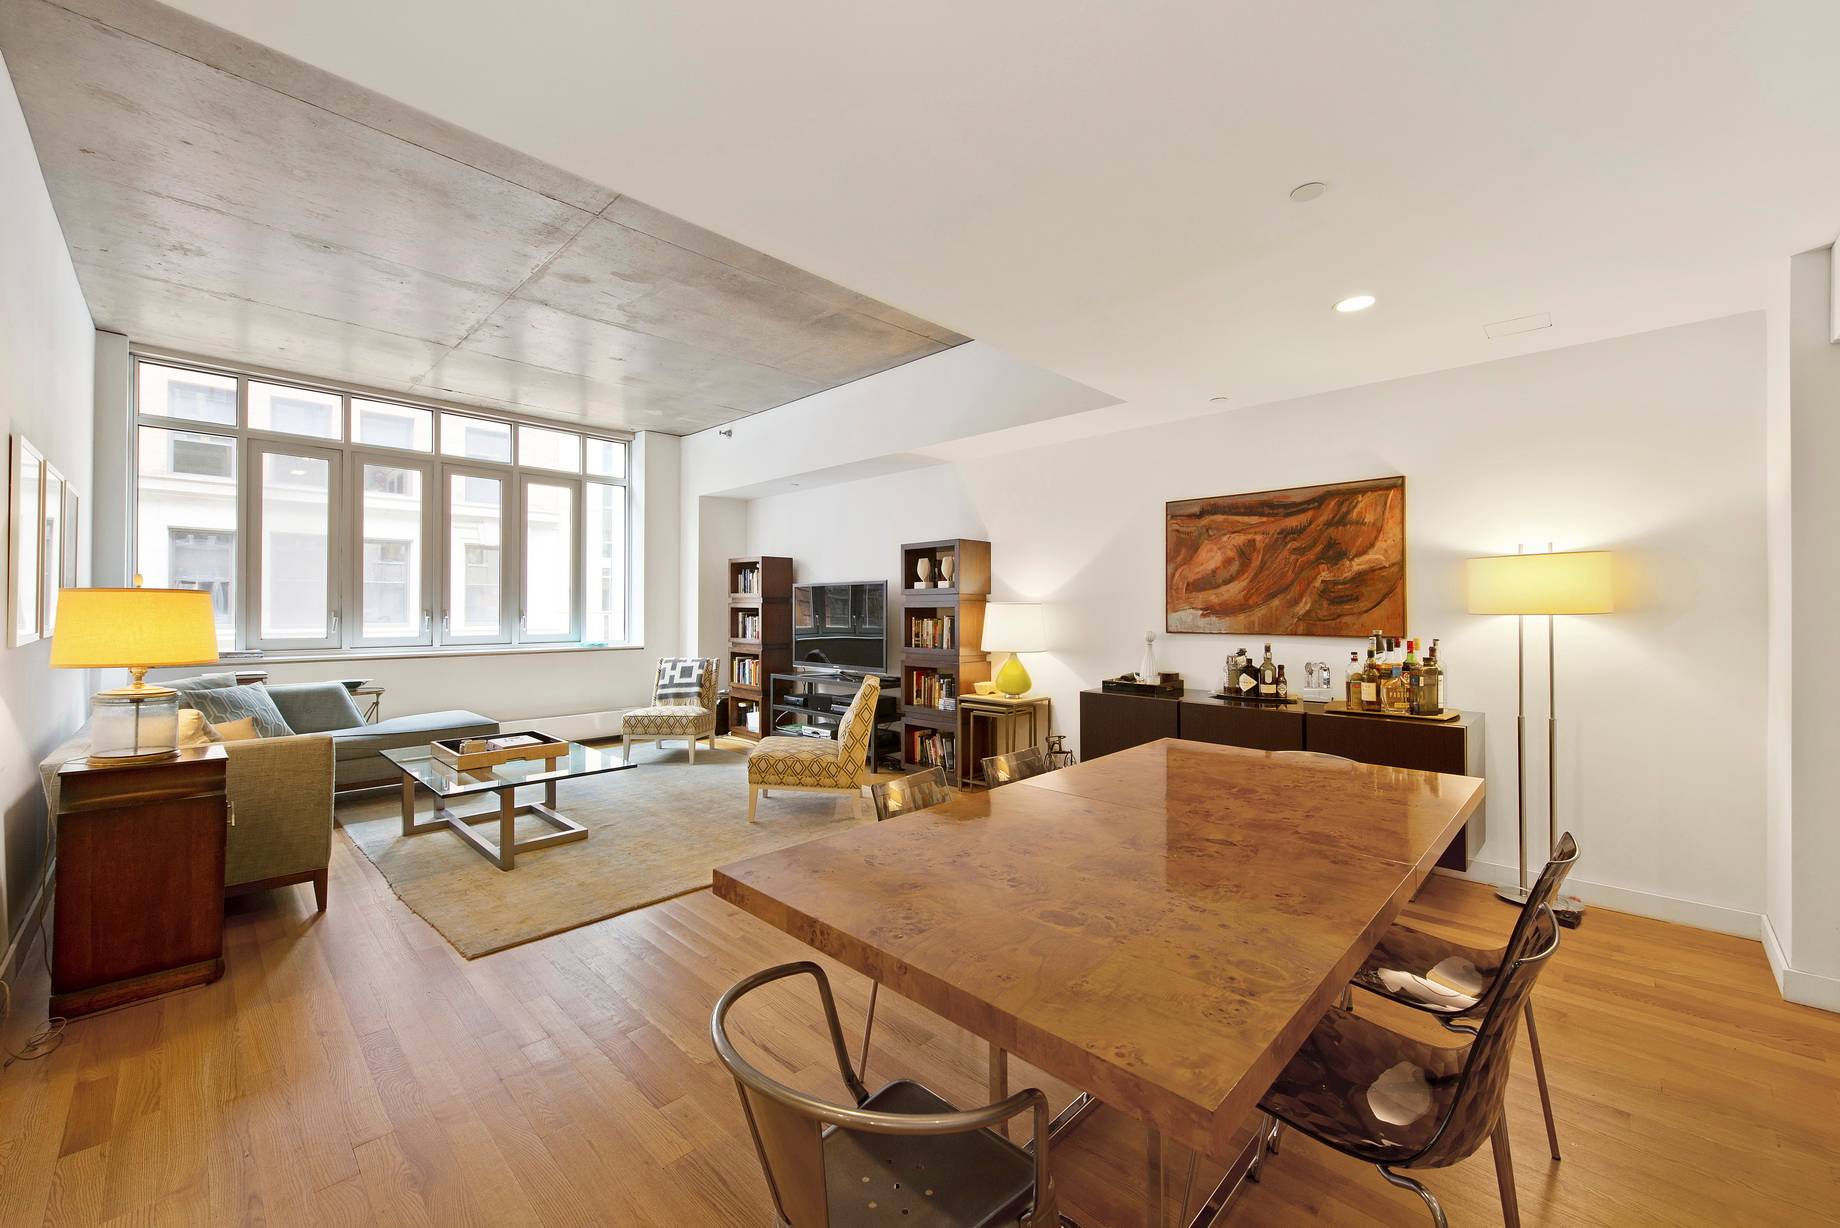 246 WEST 17th STREET CONDOMINIUM / THROUGHLY TIMELESS AND ETERNALLY CHIC CHELSEA  GRAND TWO BEDROOM SALE OFFERING